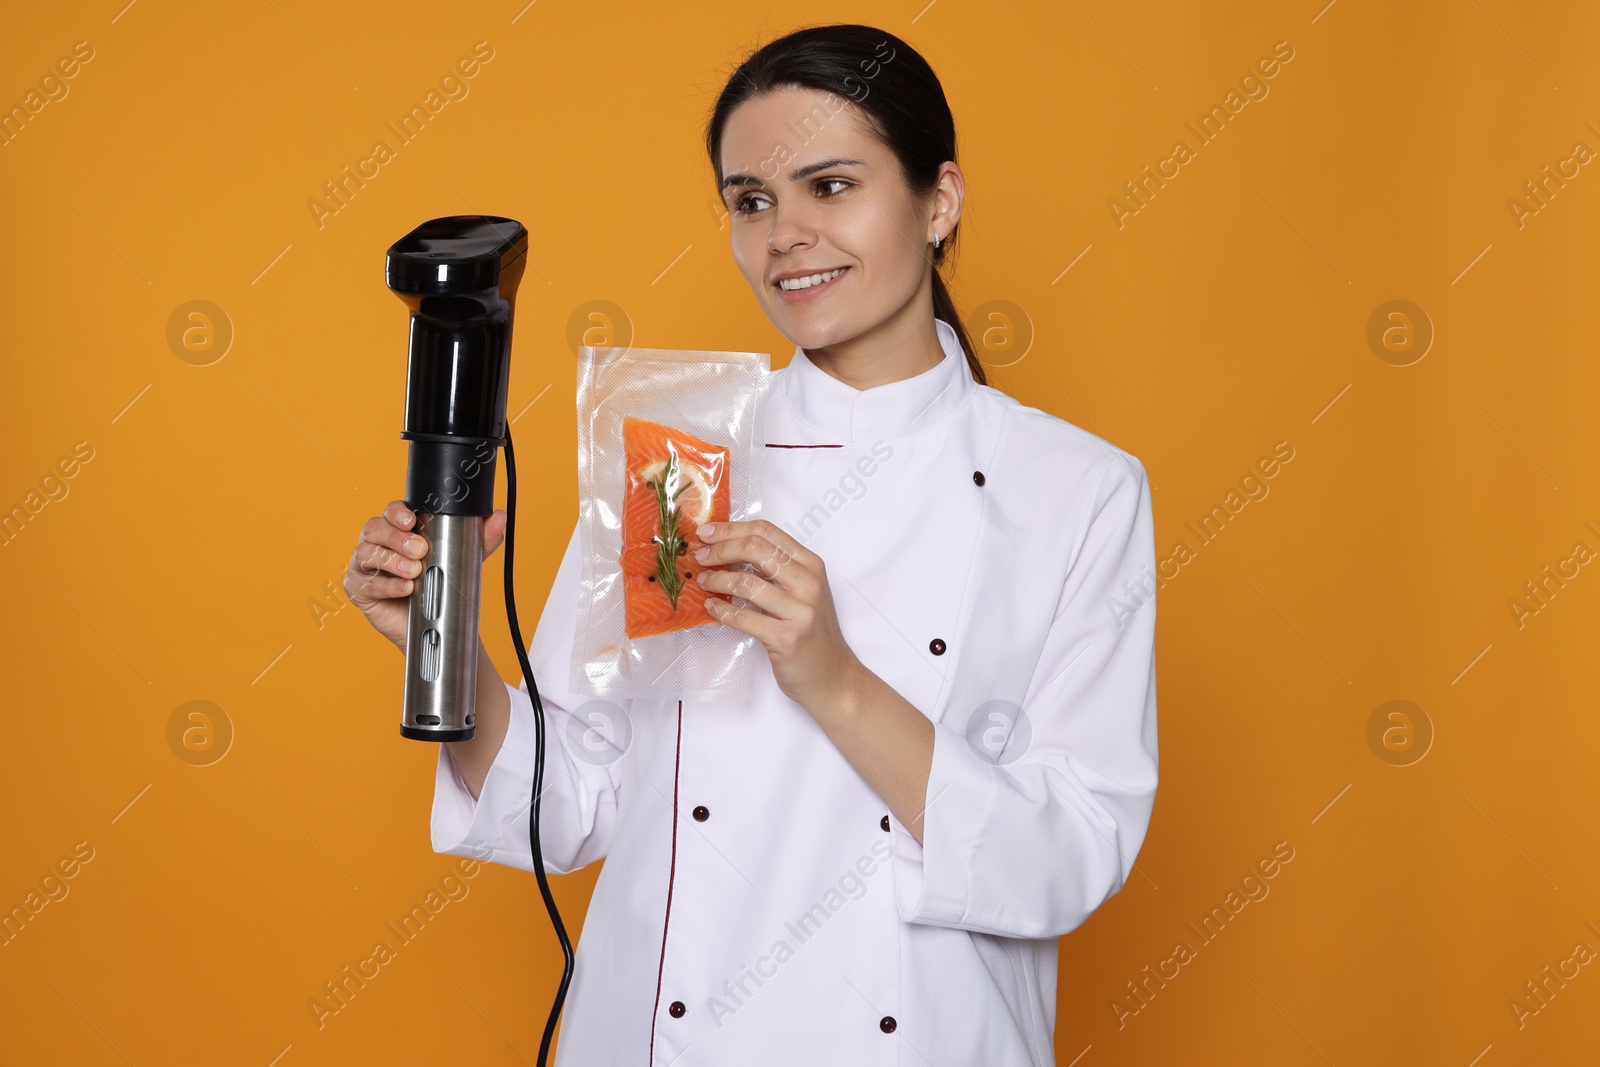 Photo of Chef holding sous vide cooker and salmon in vacuum pack on orange background